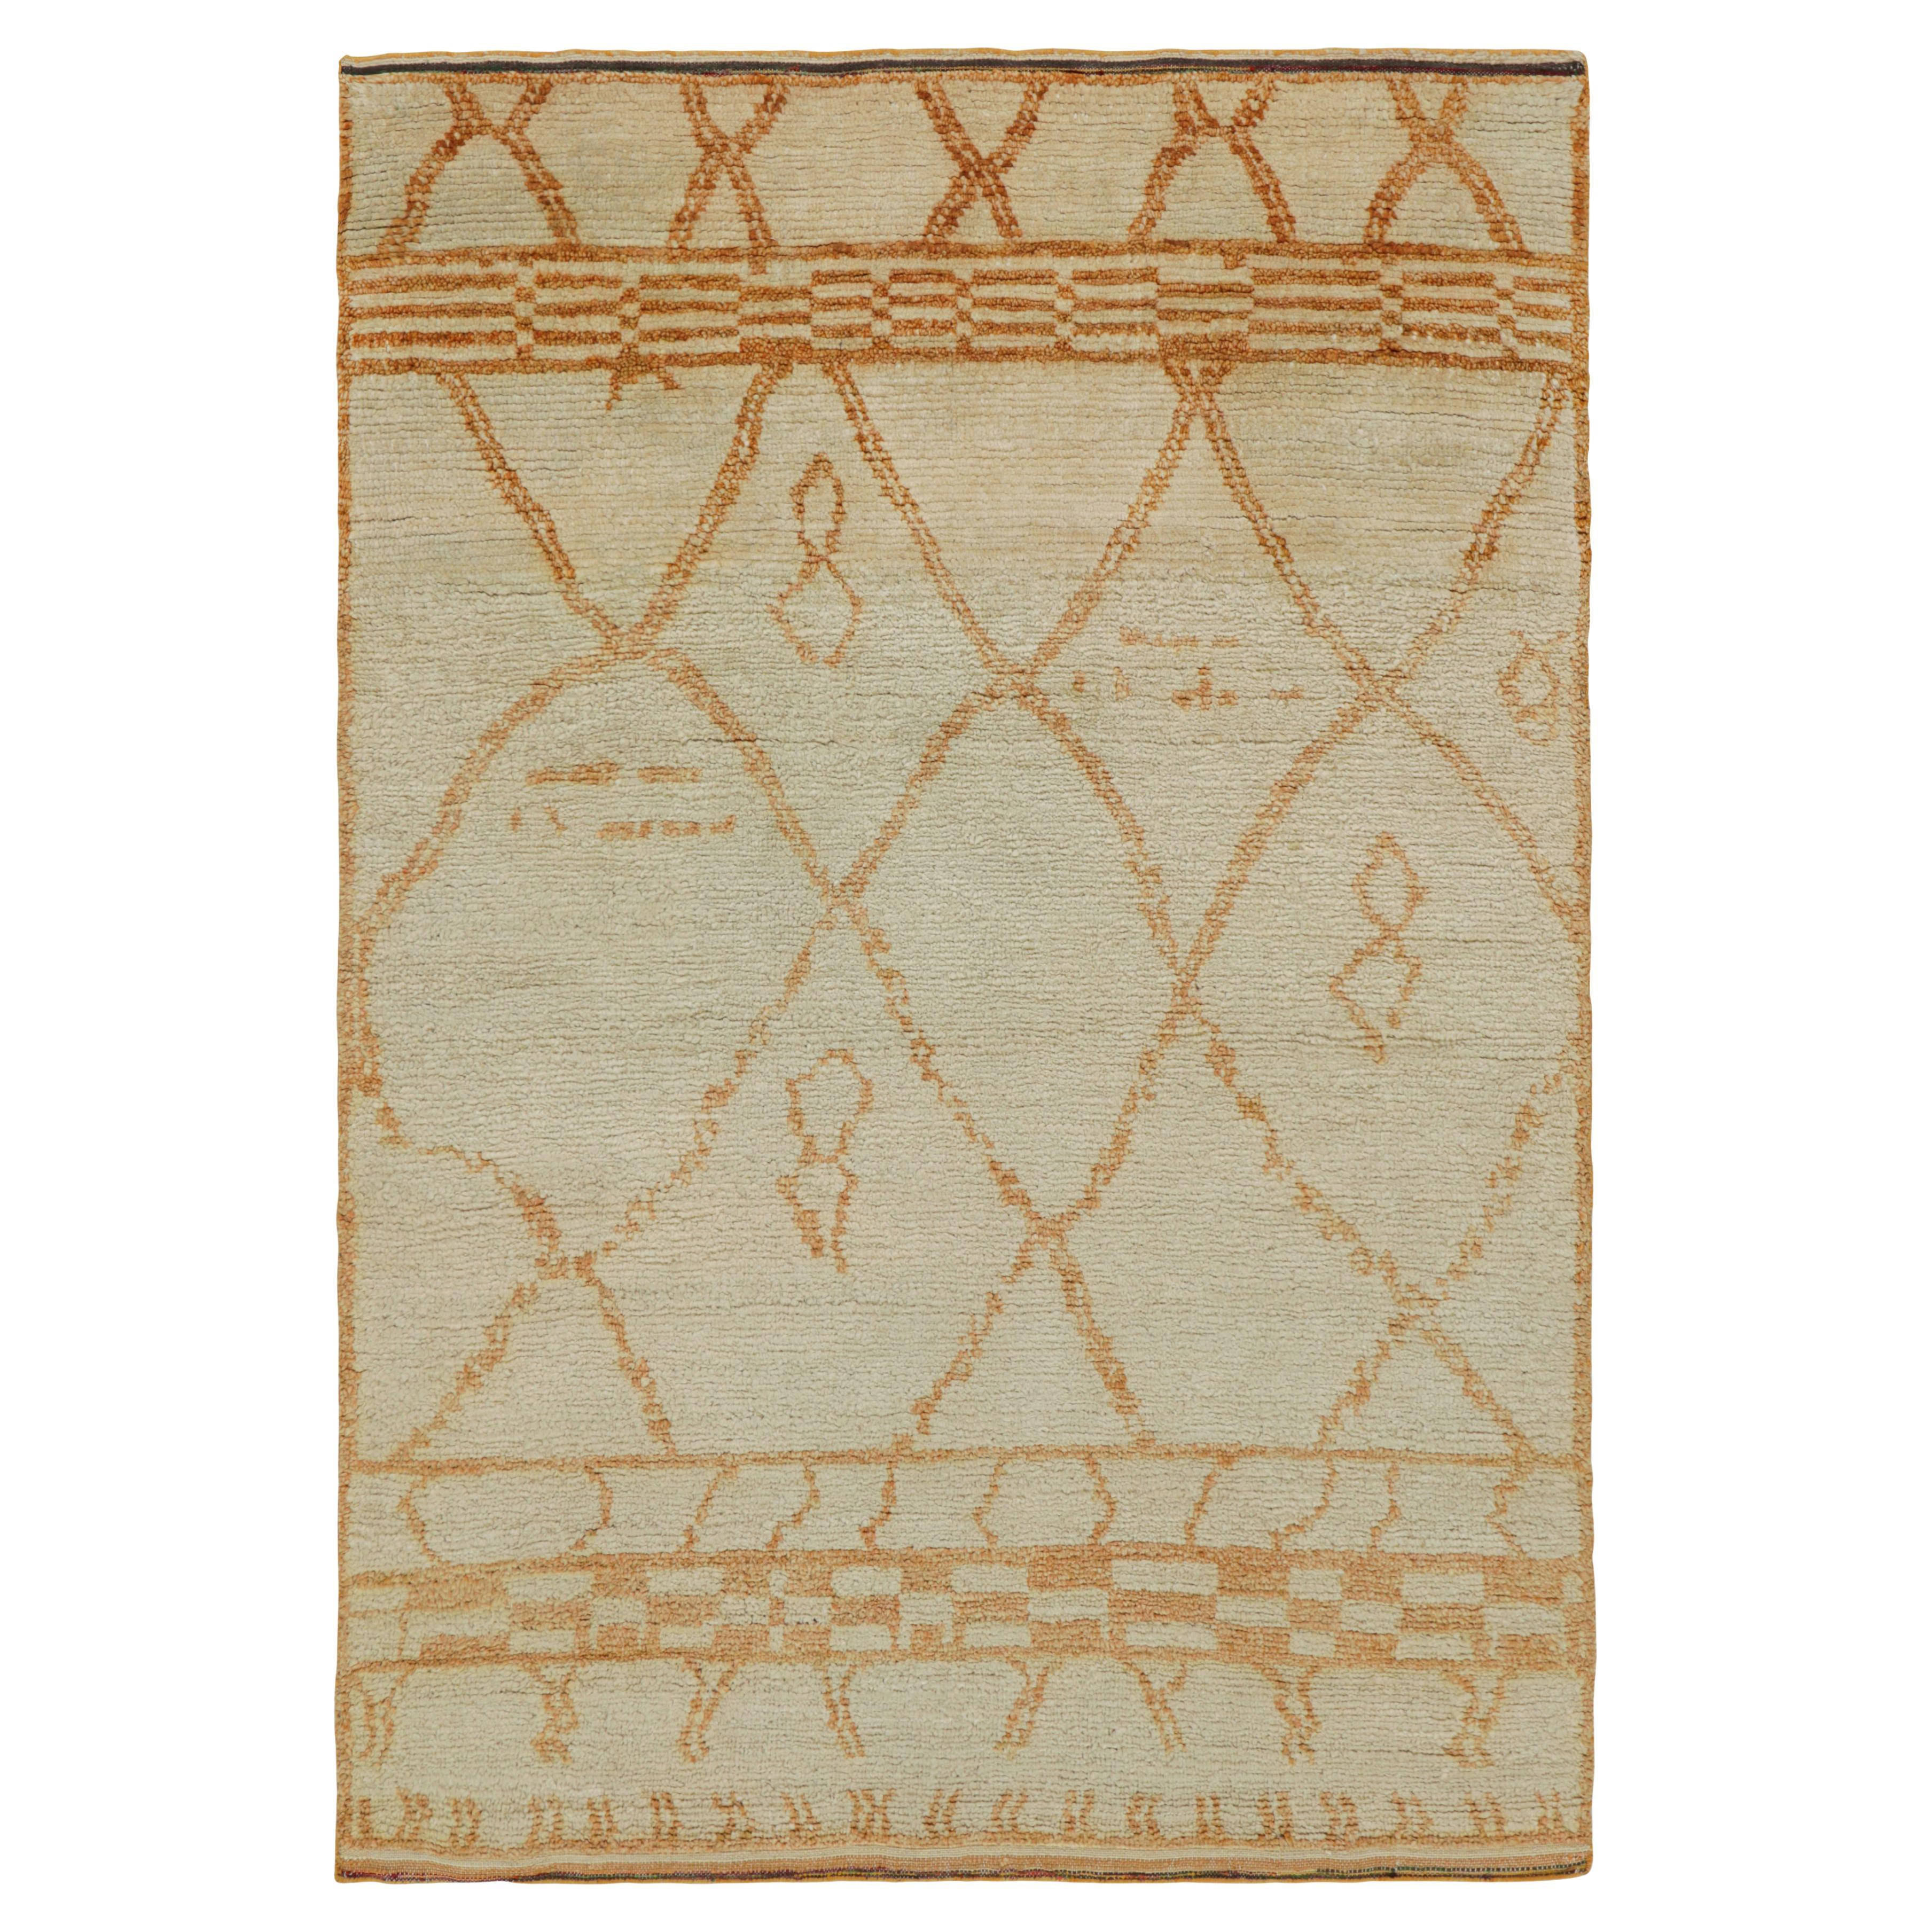 Rug & Kilim’s Moroccan Style Rug in Cream with Orange Geometric Patterns For Sale